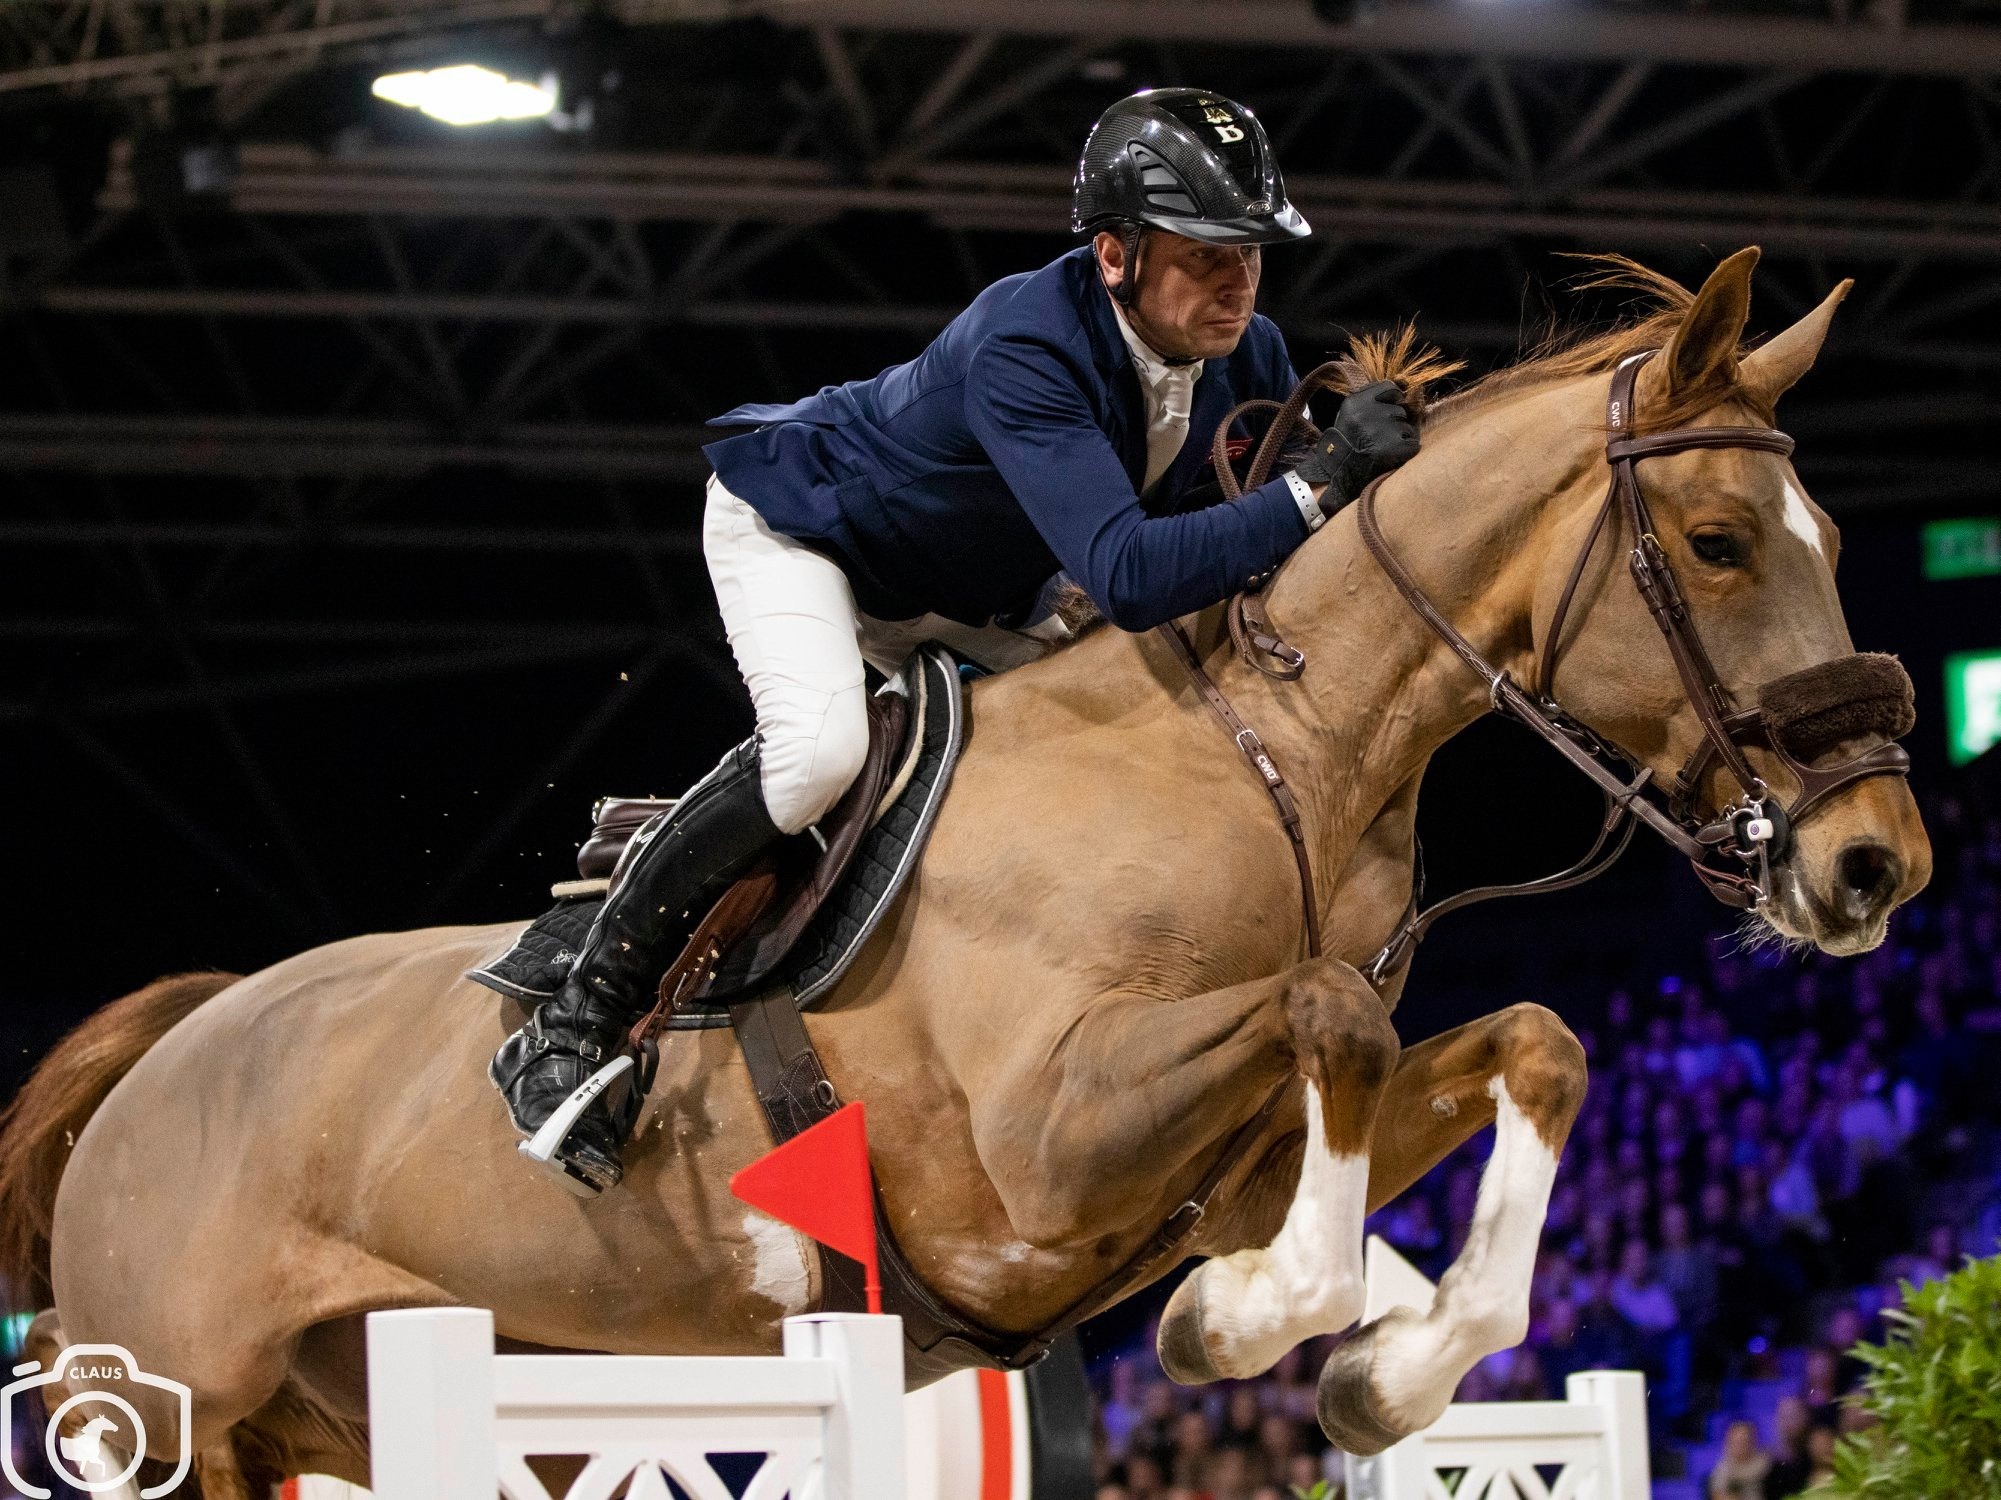 Julien Epaillard leaves all competition behind in the 1.50m class of Madrid